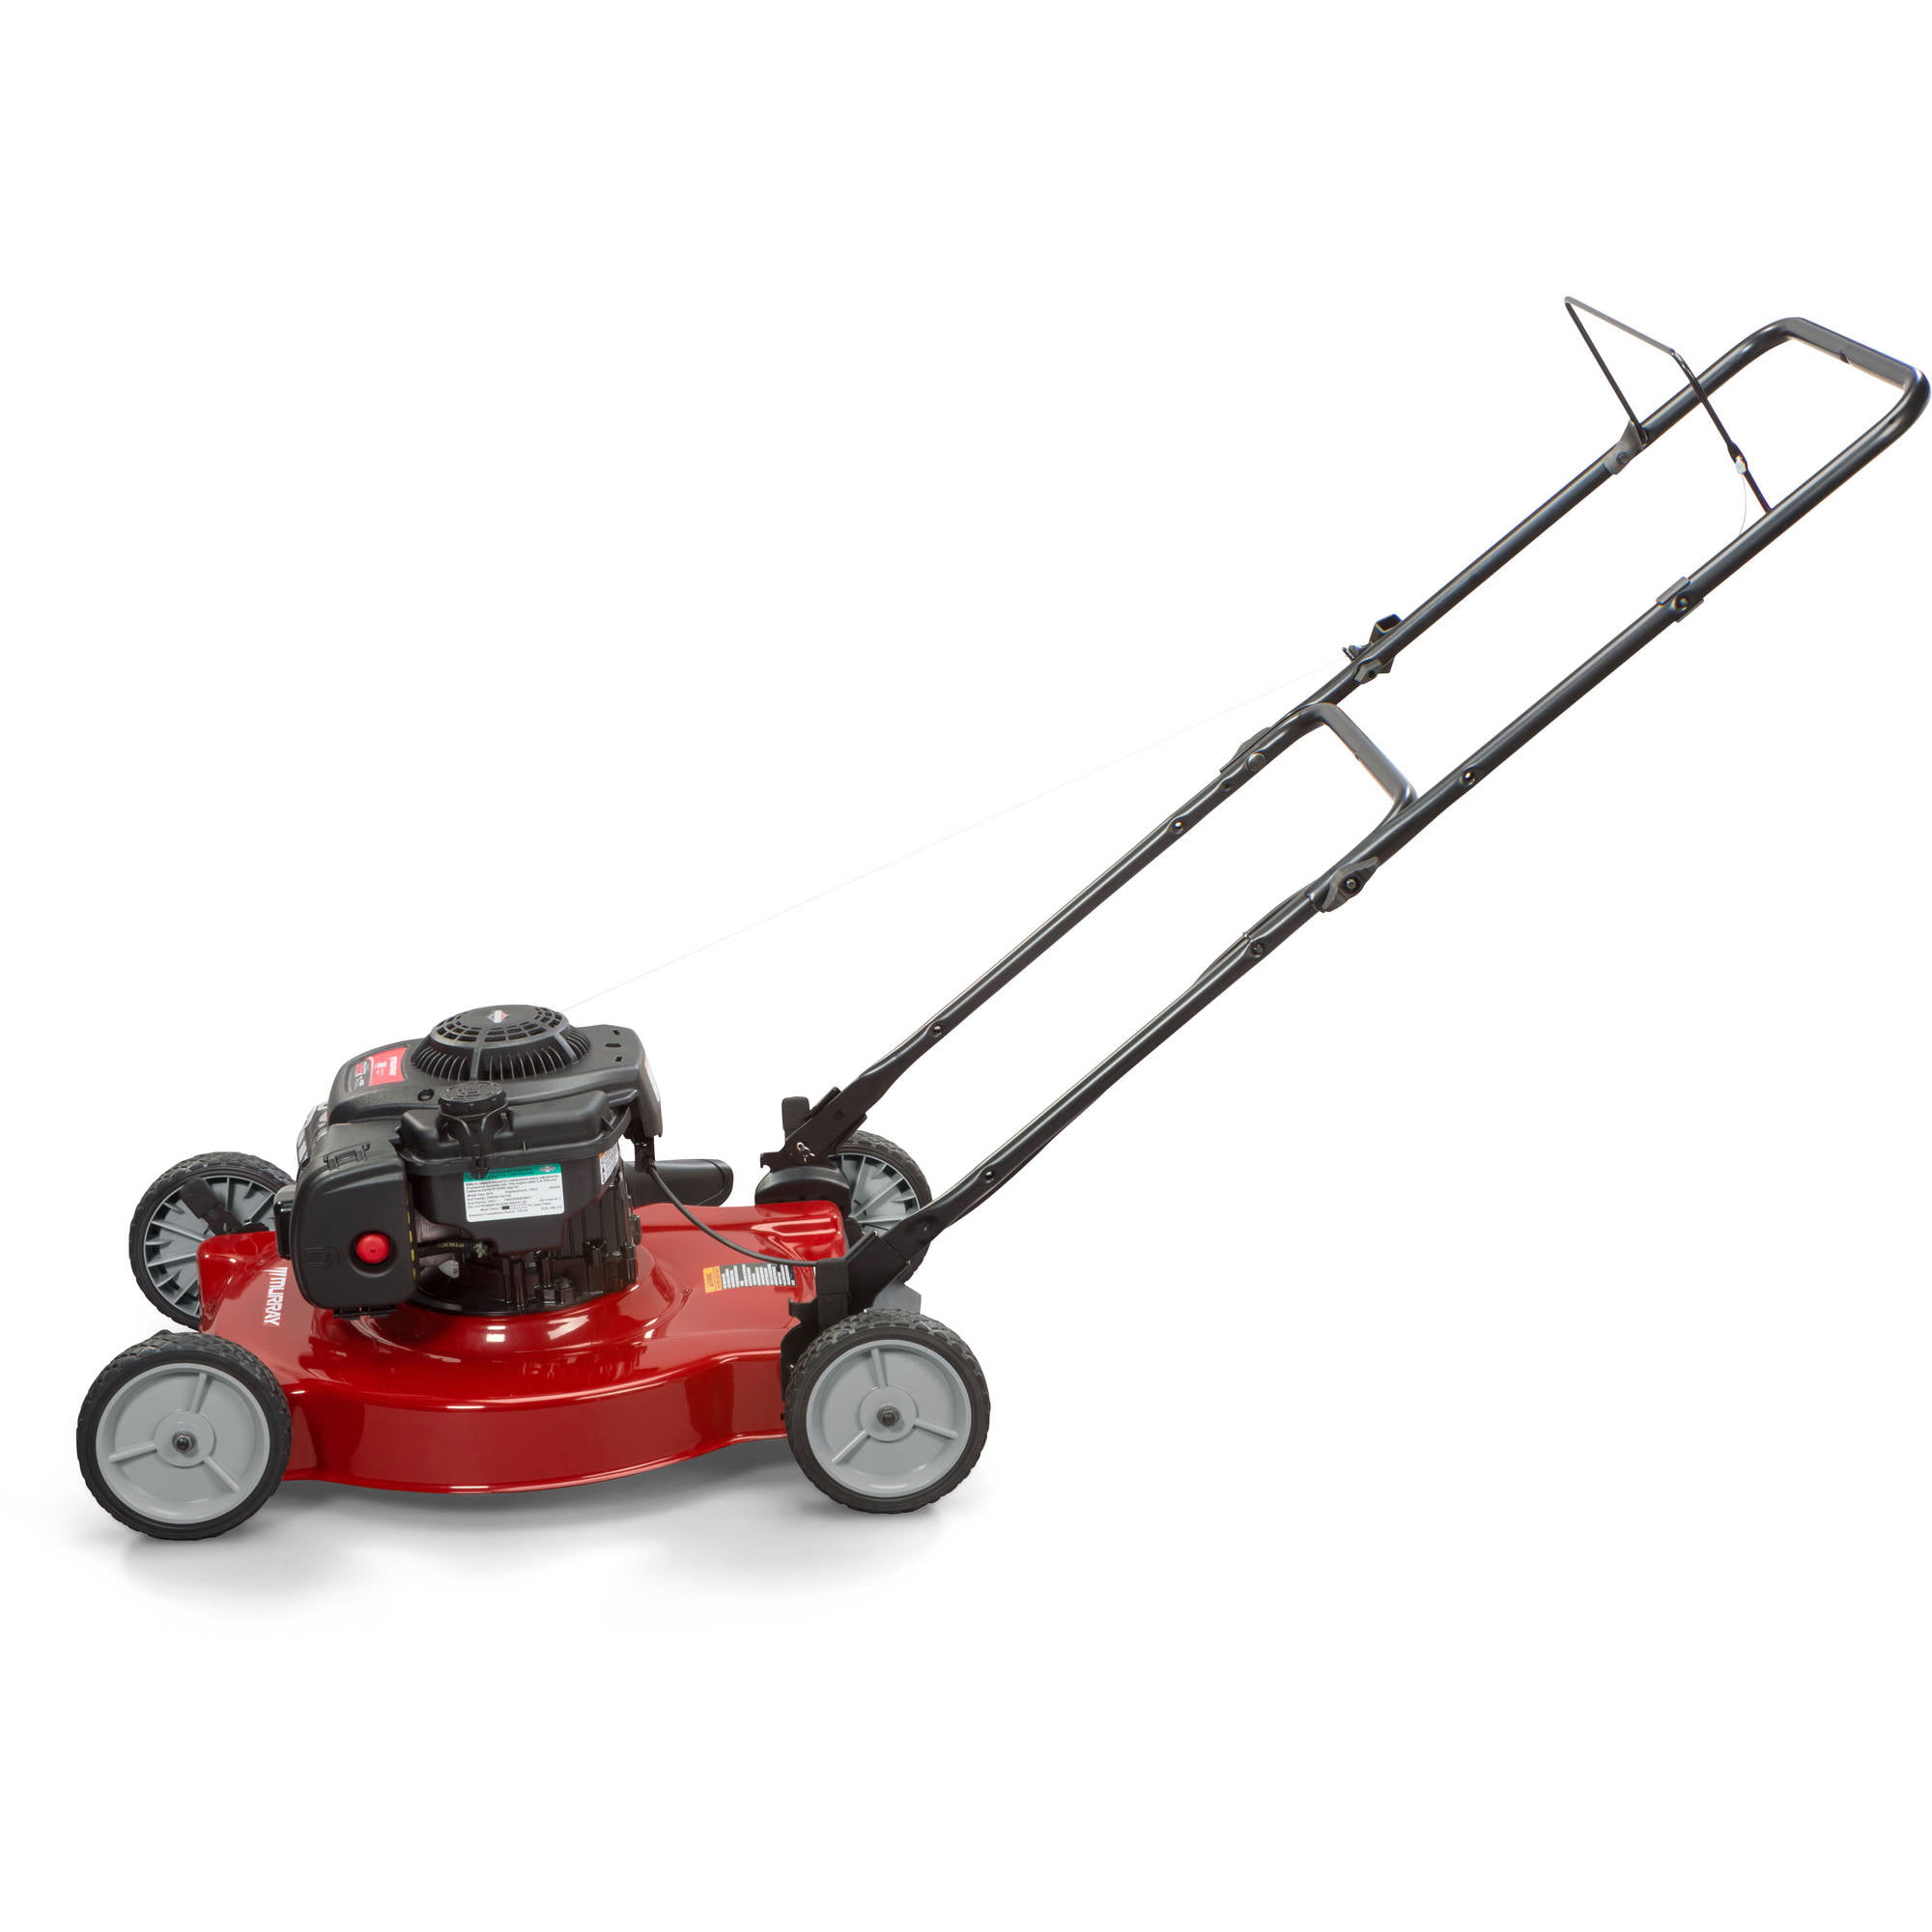 Murray 20" 125cc Gas Powered Side Discharged Push Lawn Mower